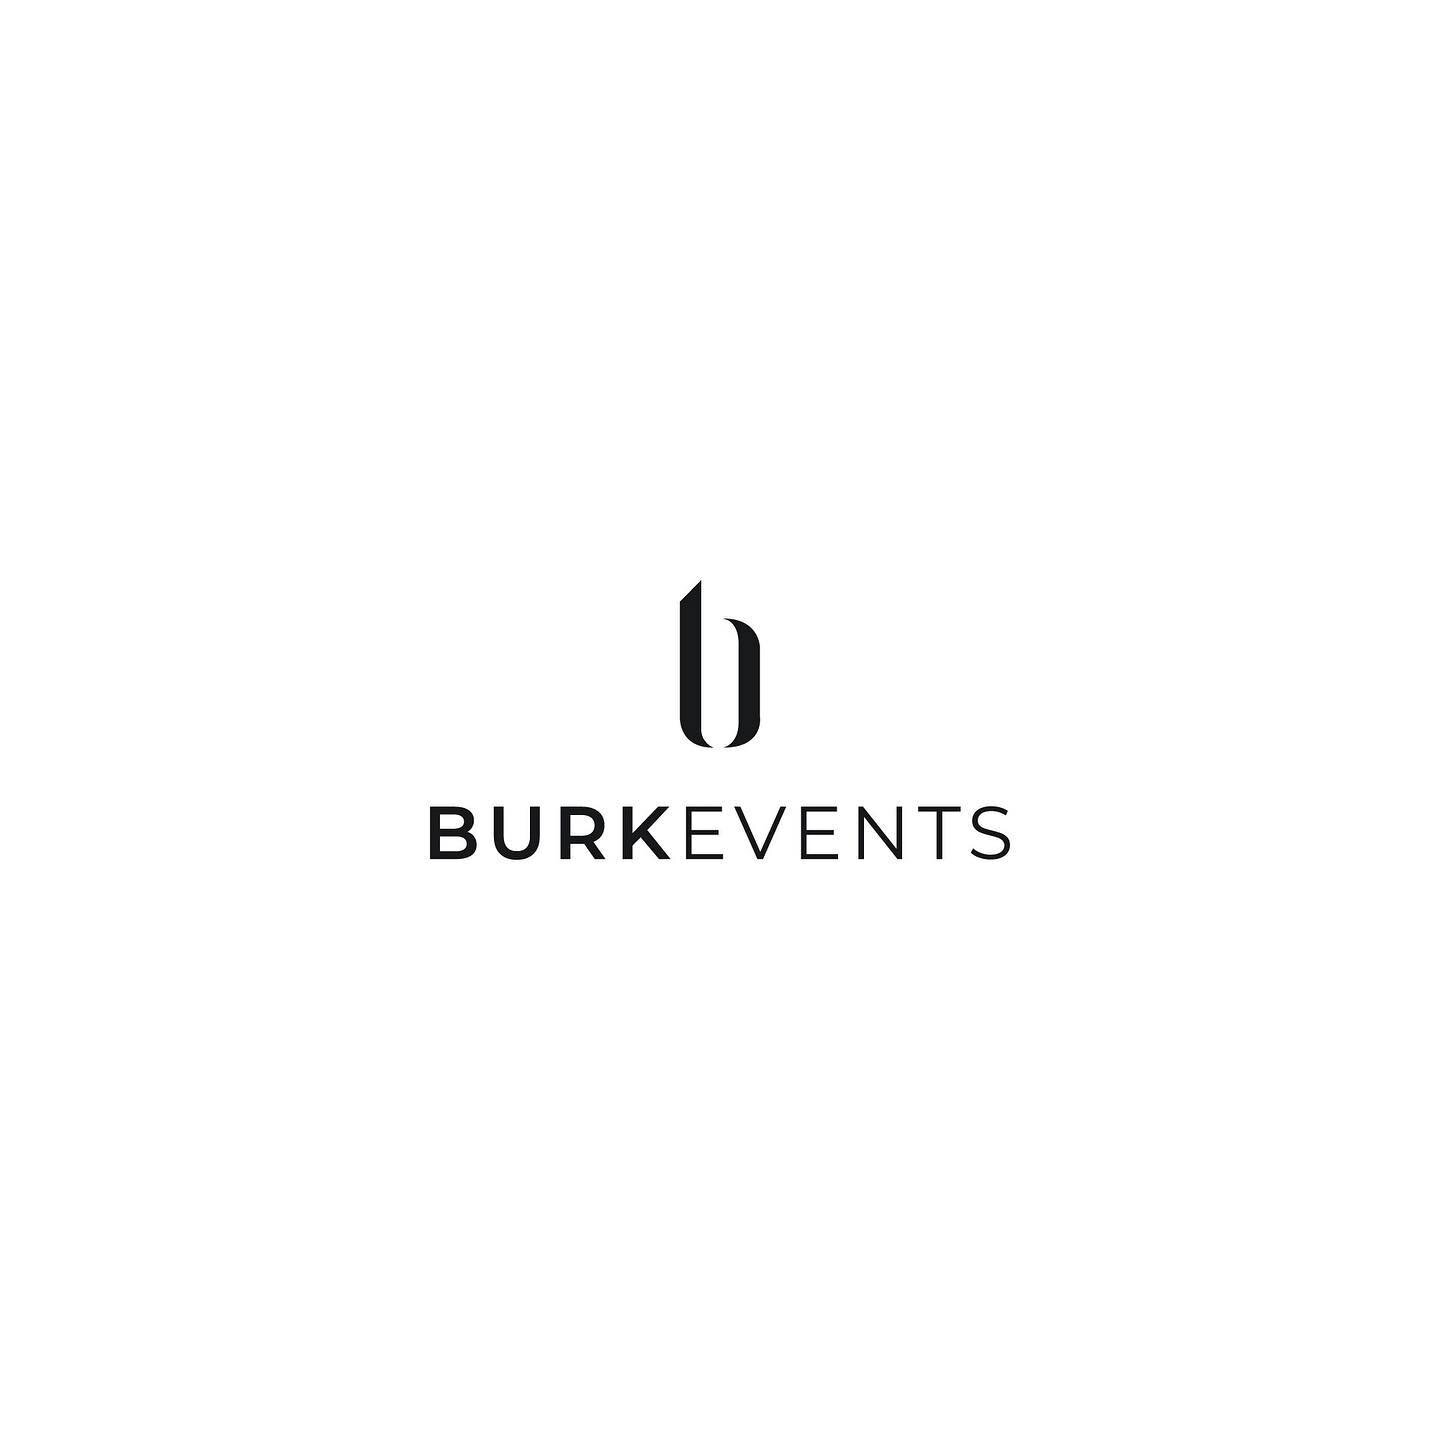 Hey everyone! 

Exciting news - we have officially rebranded.

As we continue to grow and evolve, we felt it was time for a change that better reflects our passion and dedication to creating unforgettable events. Our new brand encompasses everything 